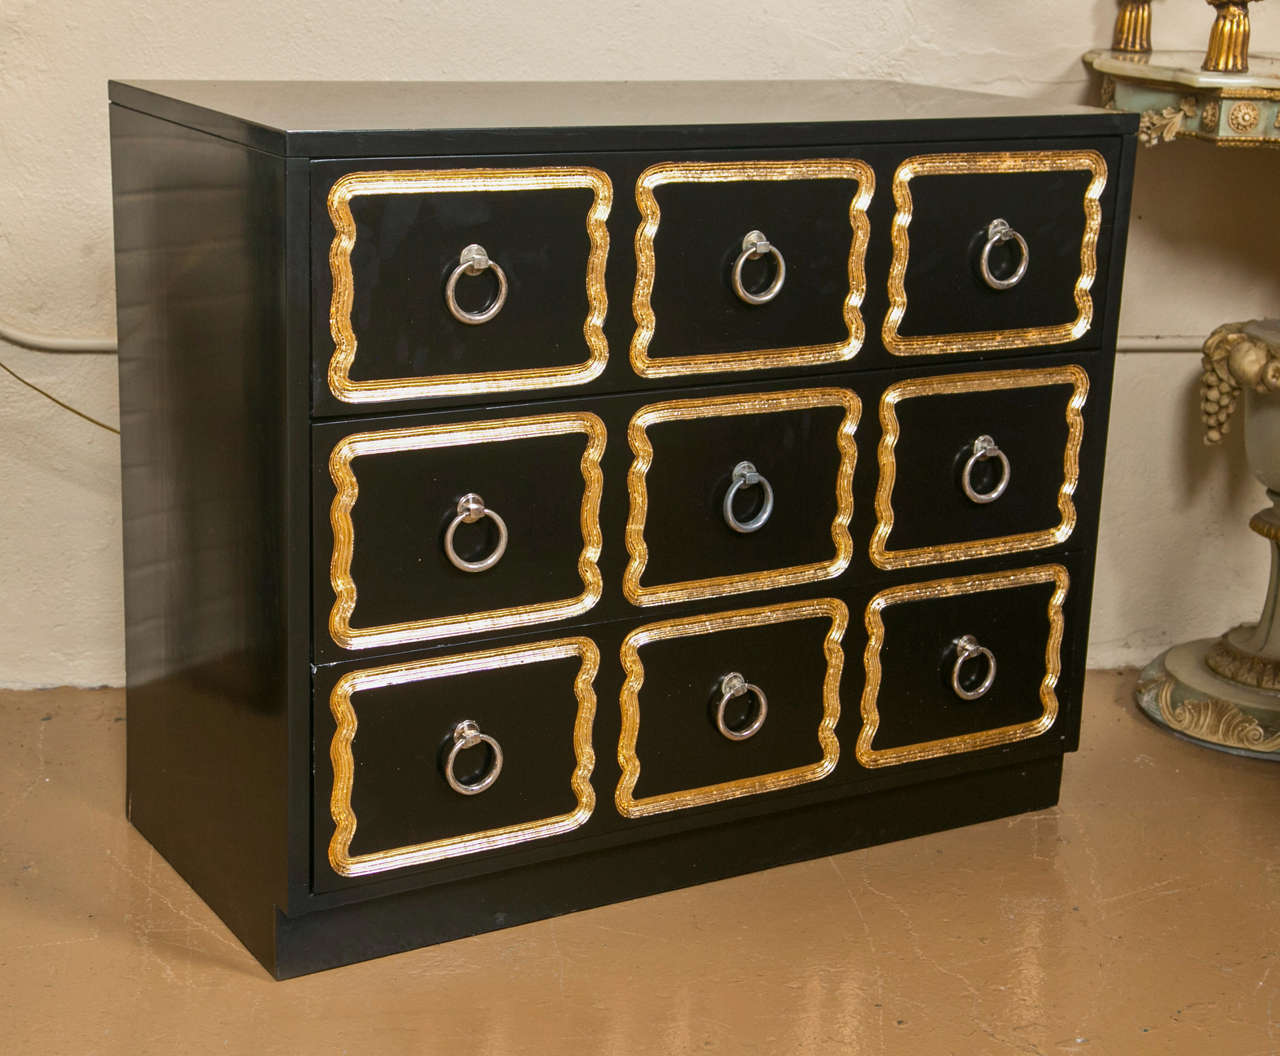 A Pair of Full Sized Dorothy Draper Espana Style Chests. These solid wooden three drawer chests of custom quality. The ebonized finish recently redone to a pristine look. The fine gilt gold framed drawers with pulls. Each having a fine French polish.